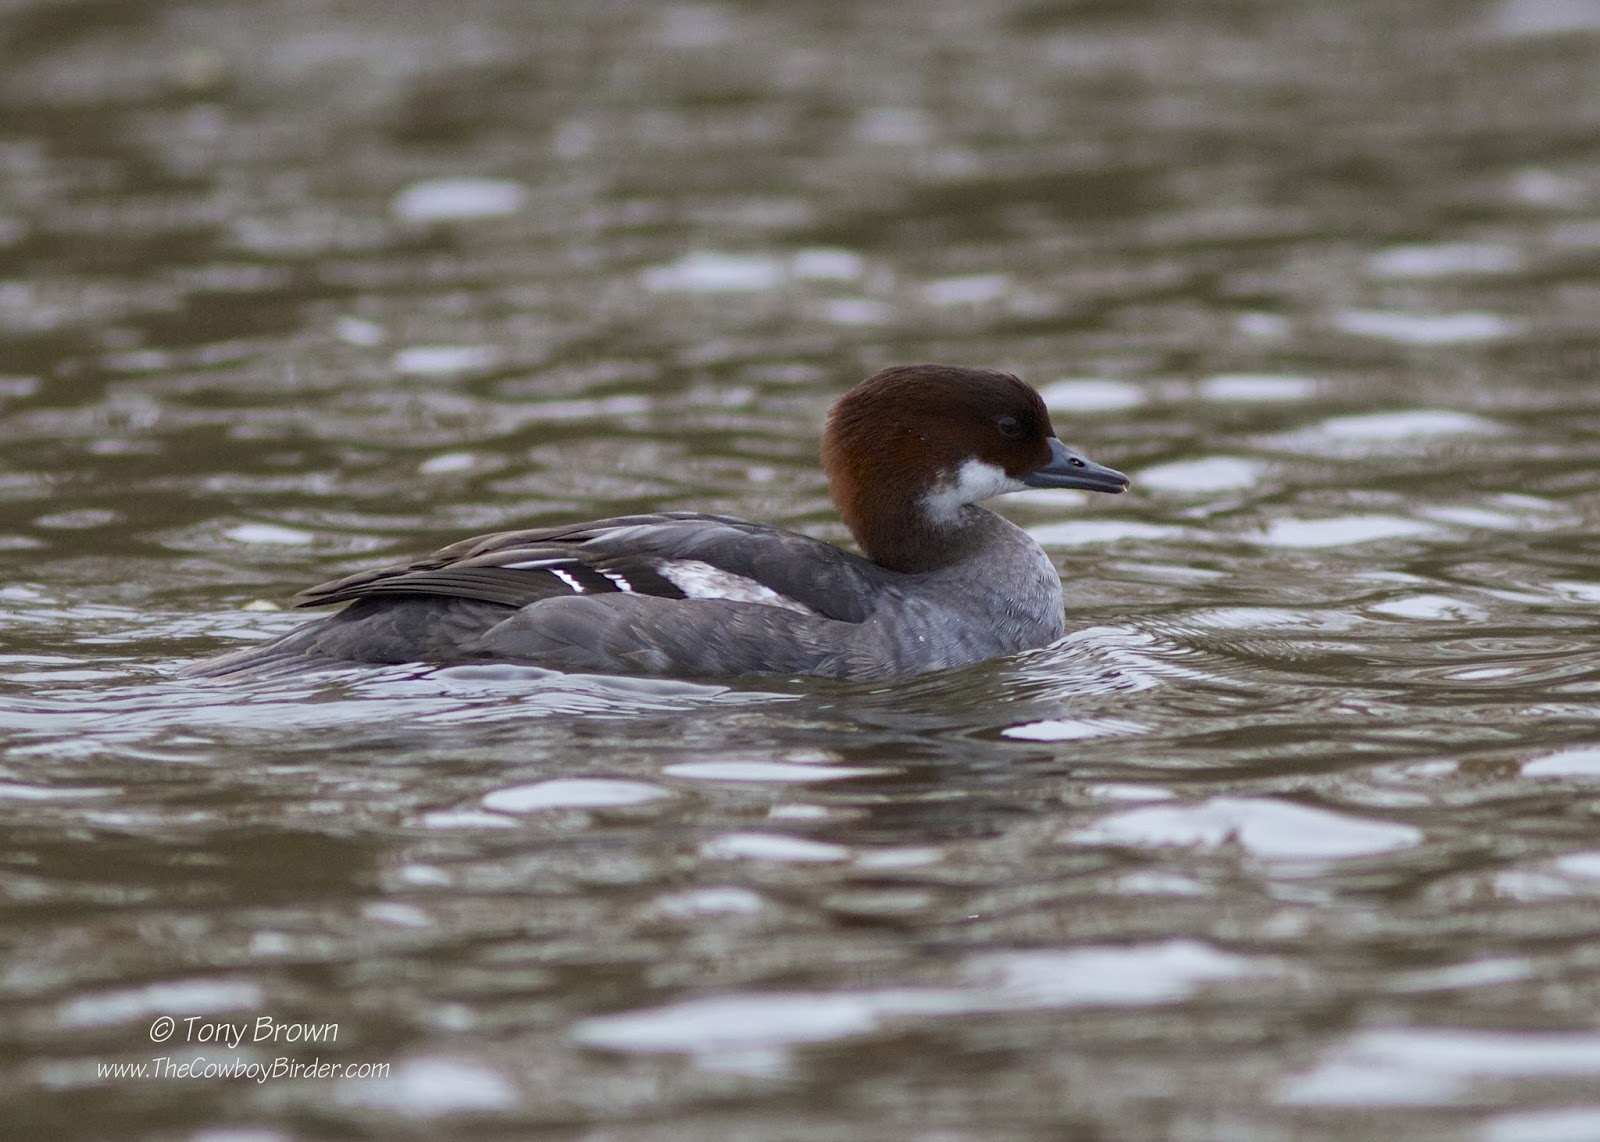 Redhead, Ducks, Epping Forest, Connaught Water, London